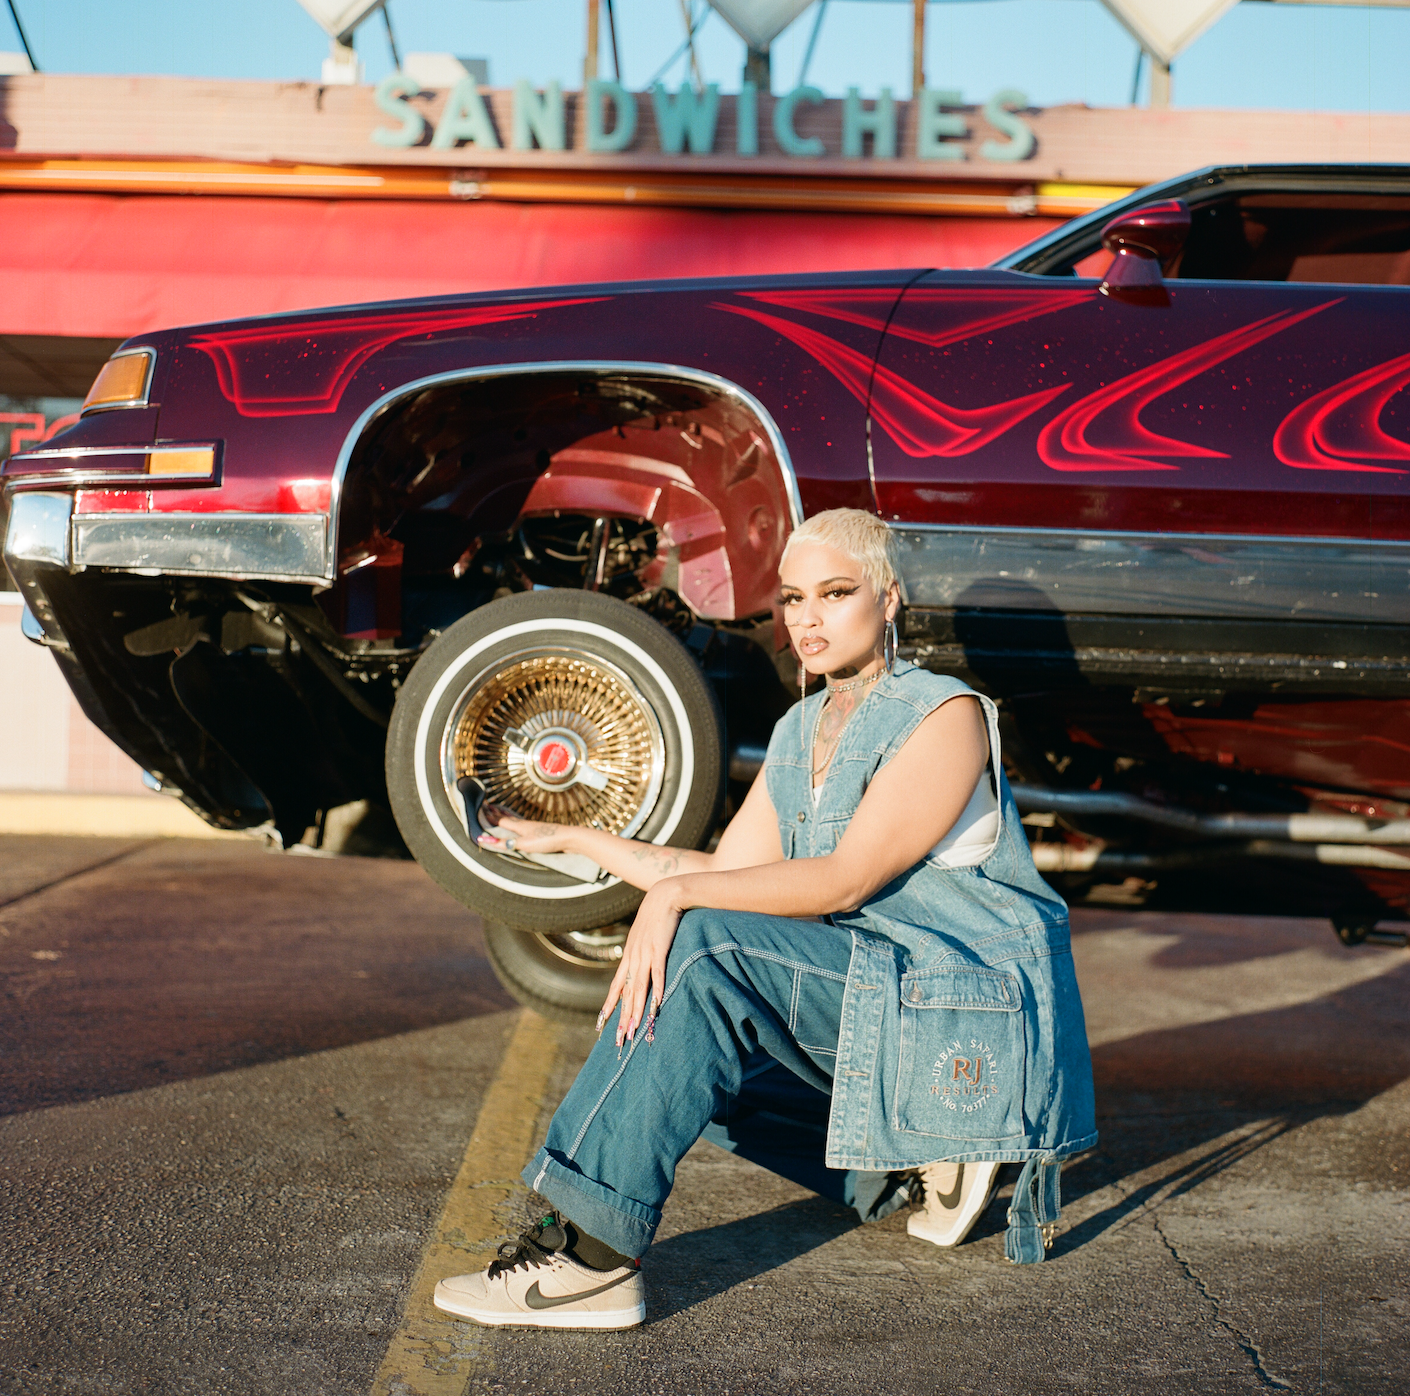 Ladies and Lowriders by Kimberly Ha Artist Opening Reception promo